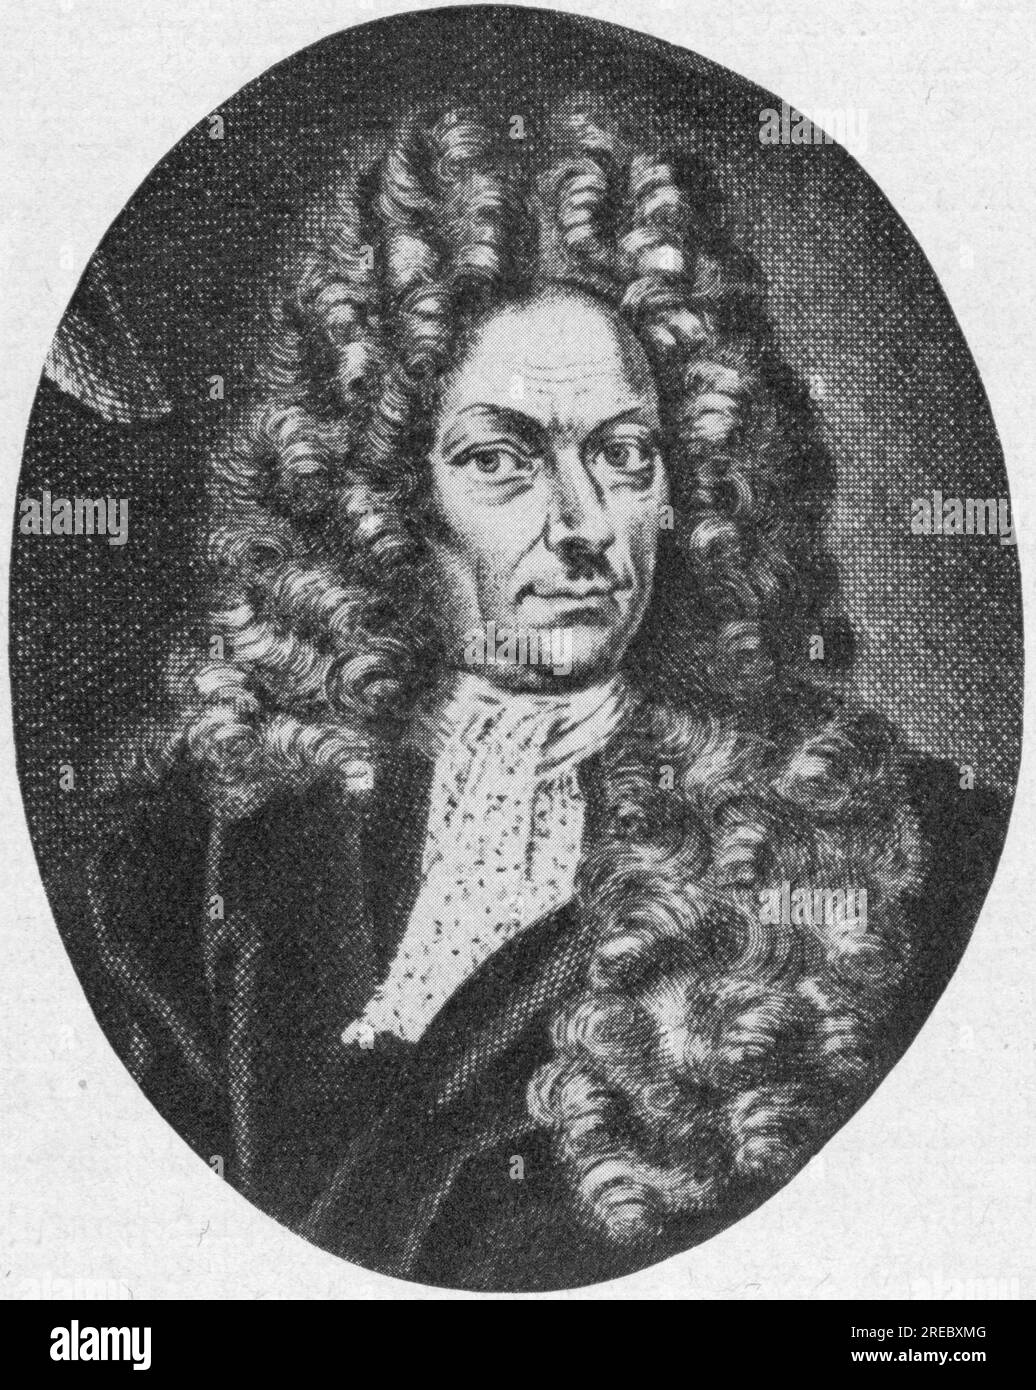 frond, Georg Wolfgang, 12.11.1645 - 6.9.1721, German physician and alchemist, after copper engraving, ADDITIONAL-RIGHTS-CLEARANCE-INFO-NOT-AVAILABLE Stock Photo